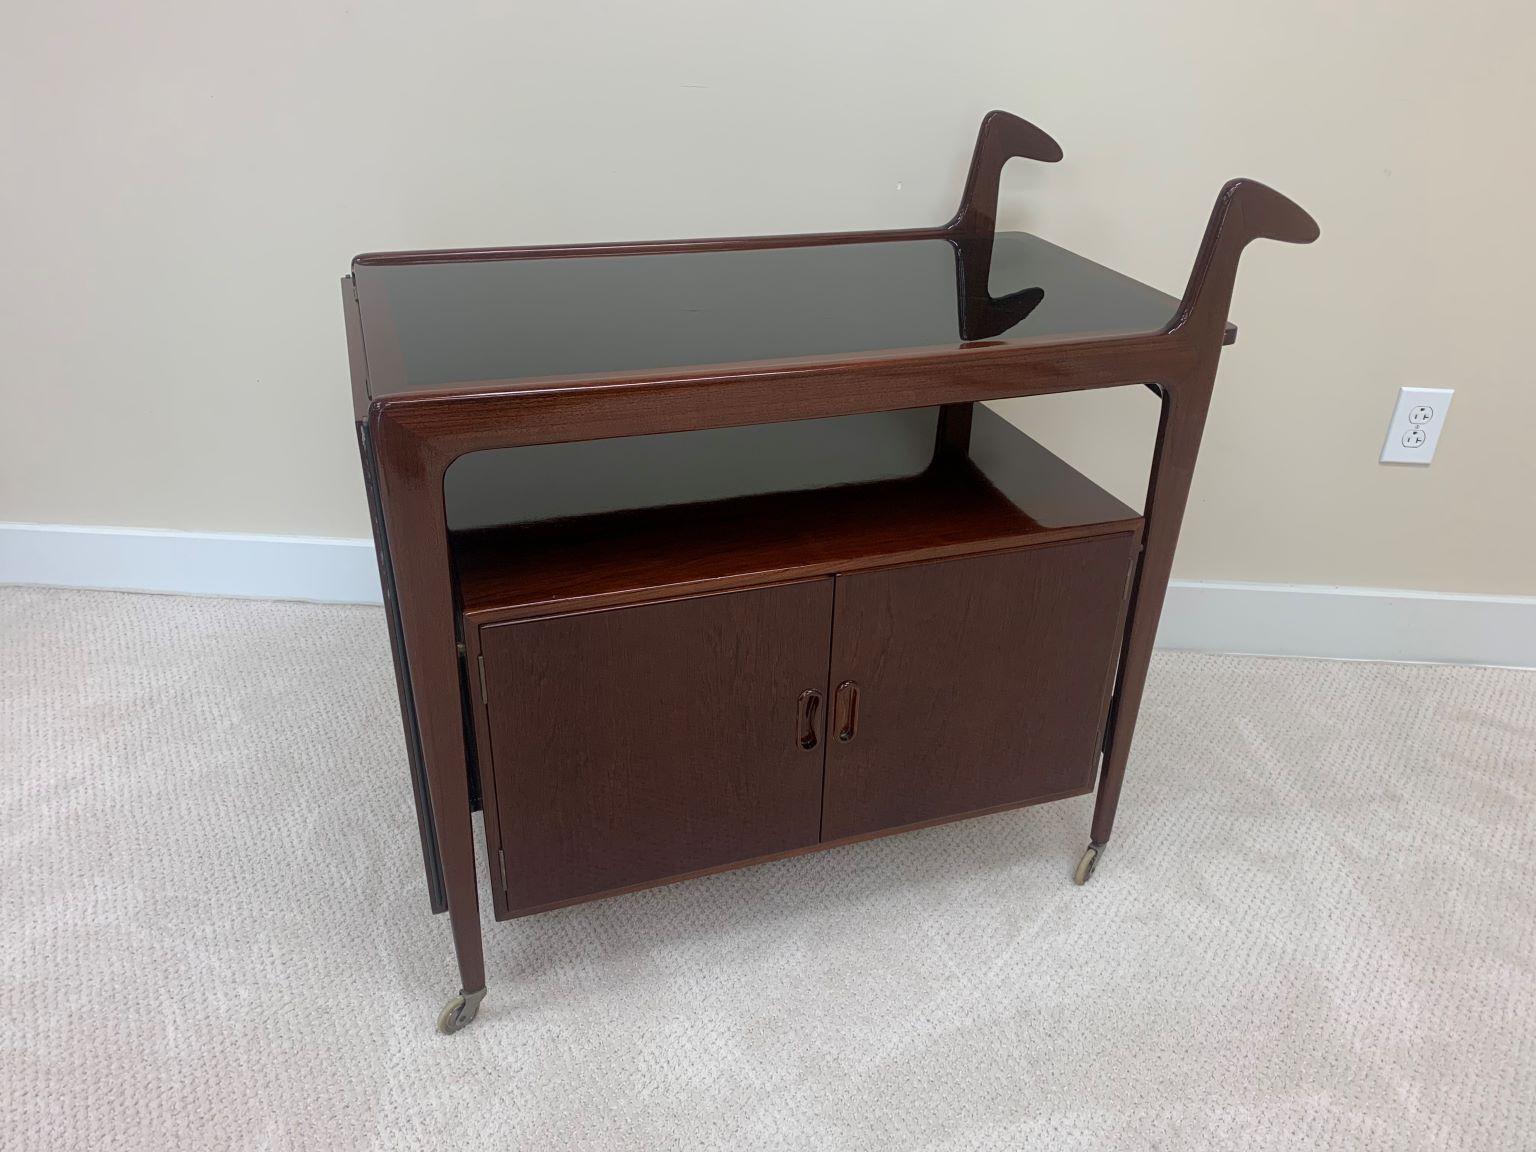 Professionally restored Danish modern bar cart possibly by Falster in a gloss finish. This unique example has a drop down top, which when extended creates a large serving area. Lower section has two doors for great storage. Height to top of serving